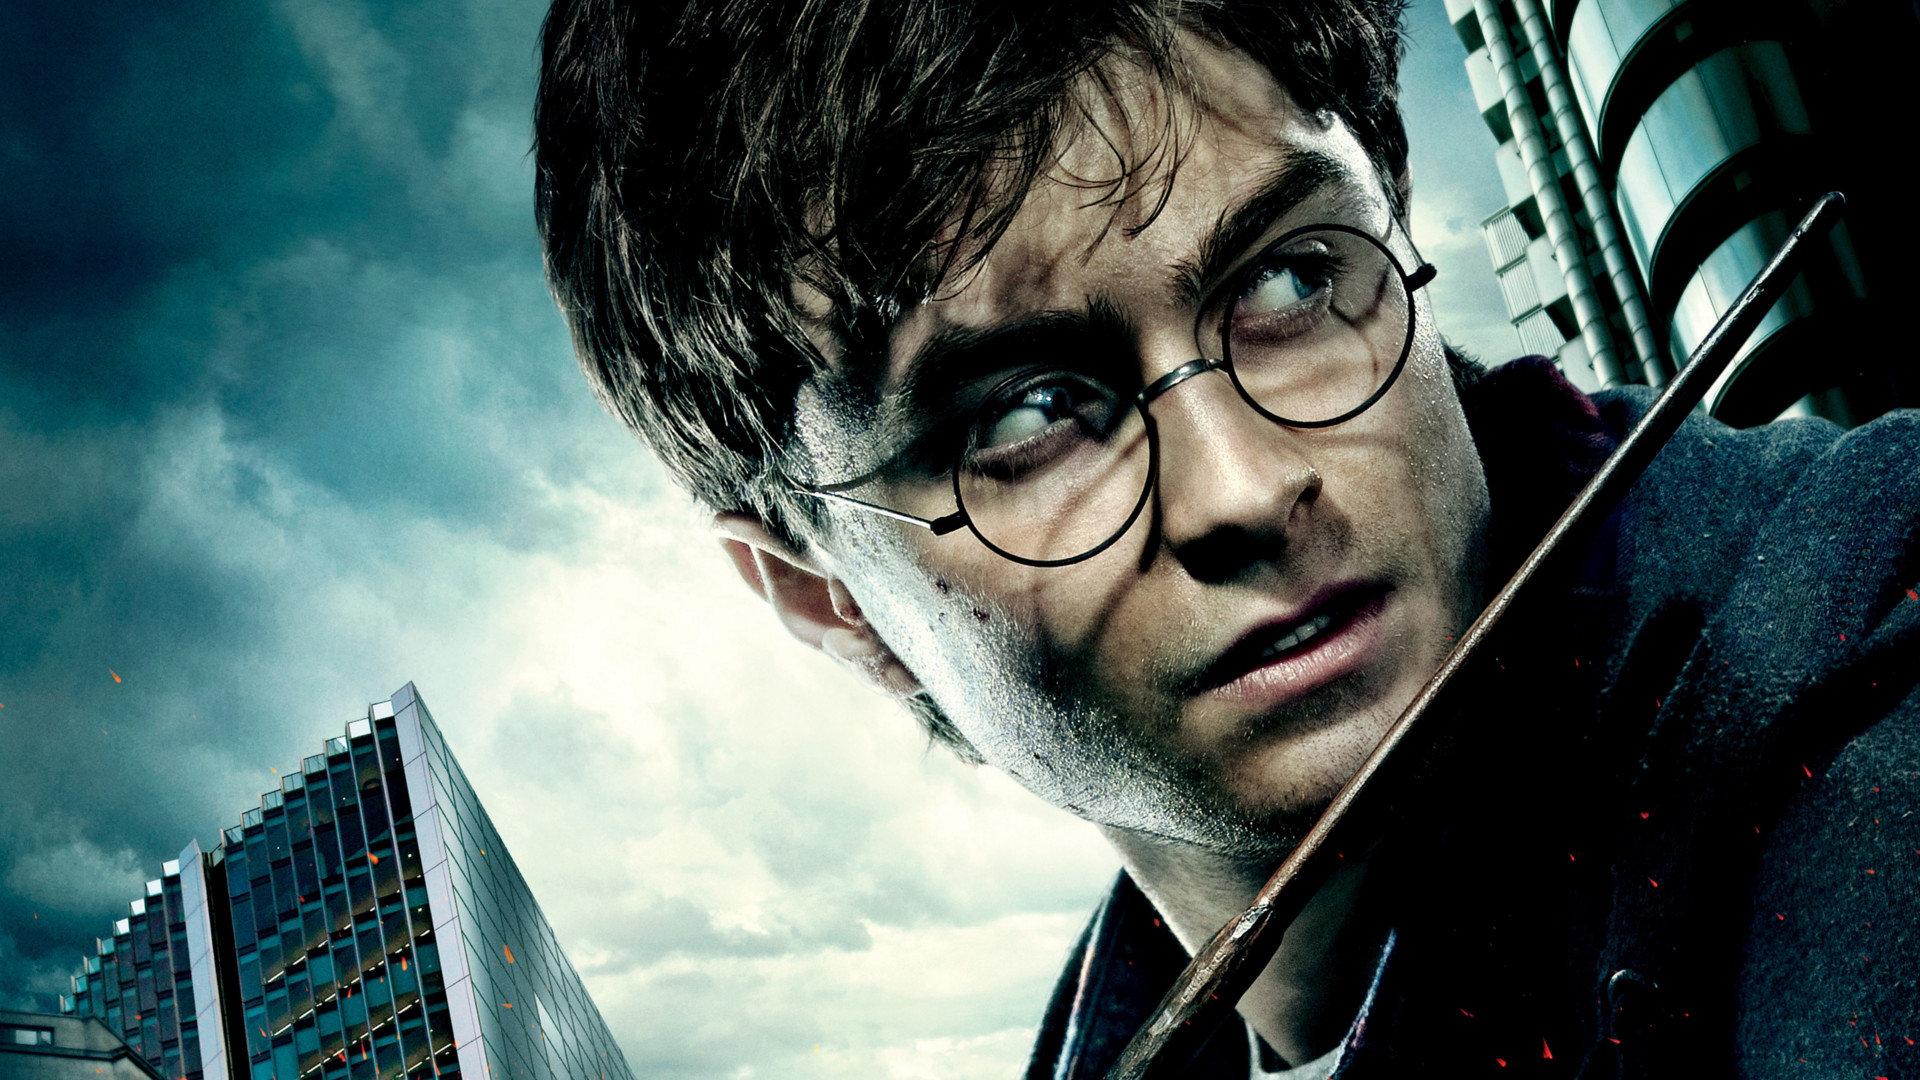 High resolution Harry Potter And The Deathly Hallows: Part 1 full hd 1920x1080 wallpaper ID:144641 for desktop